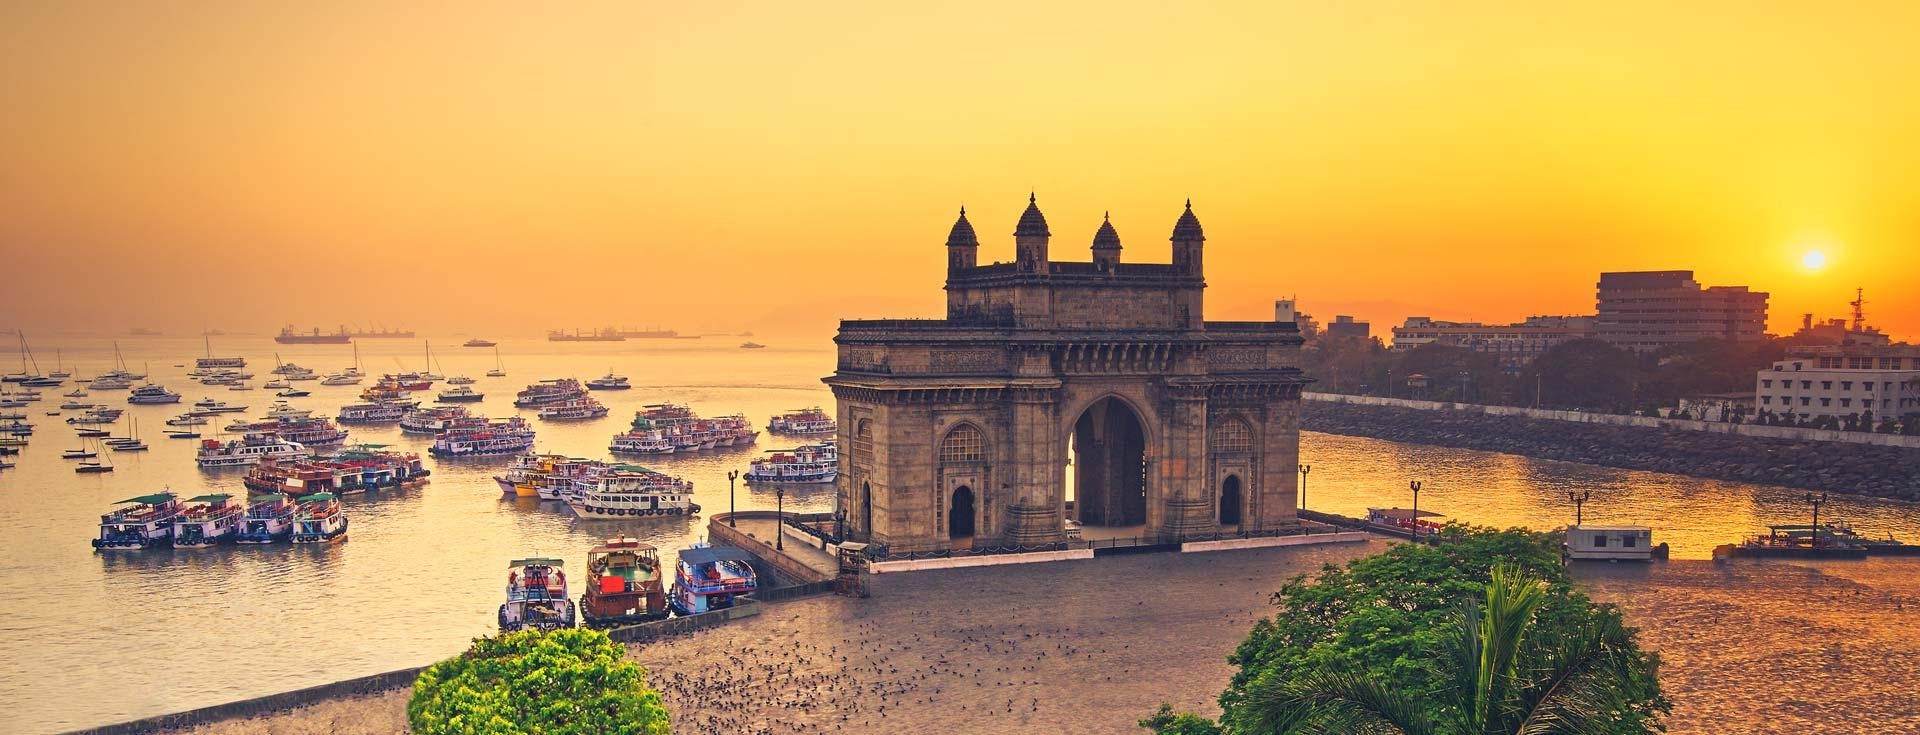 20-facts-about-gateway-of-india